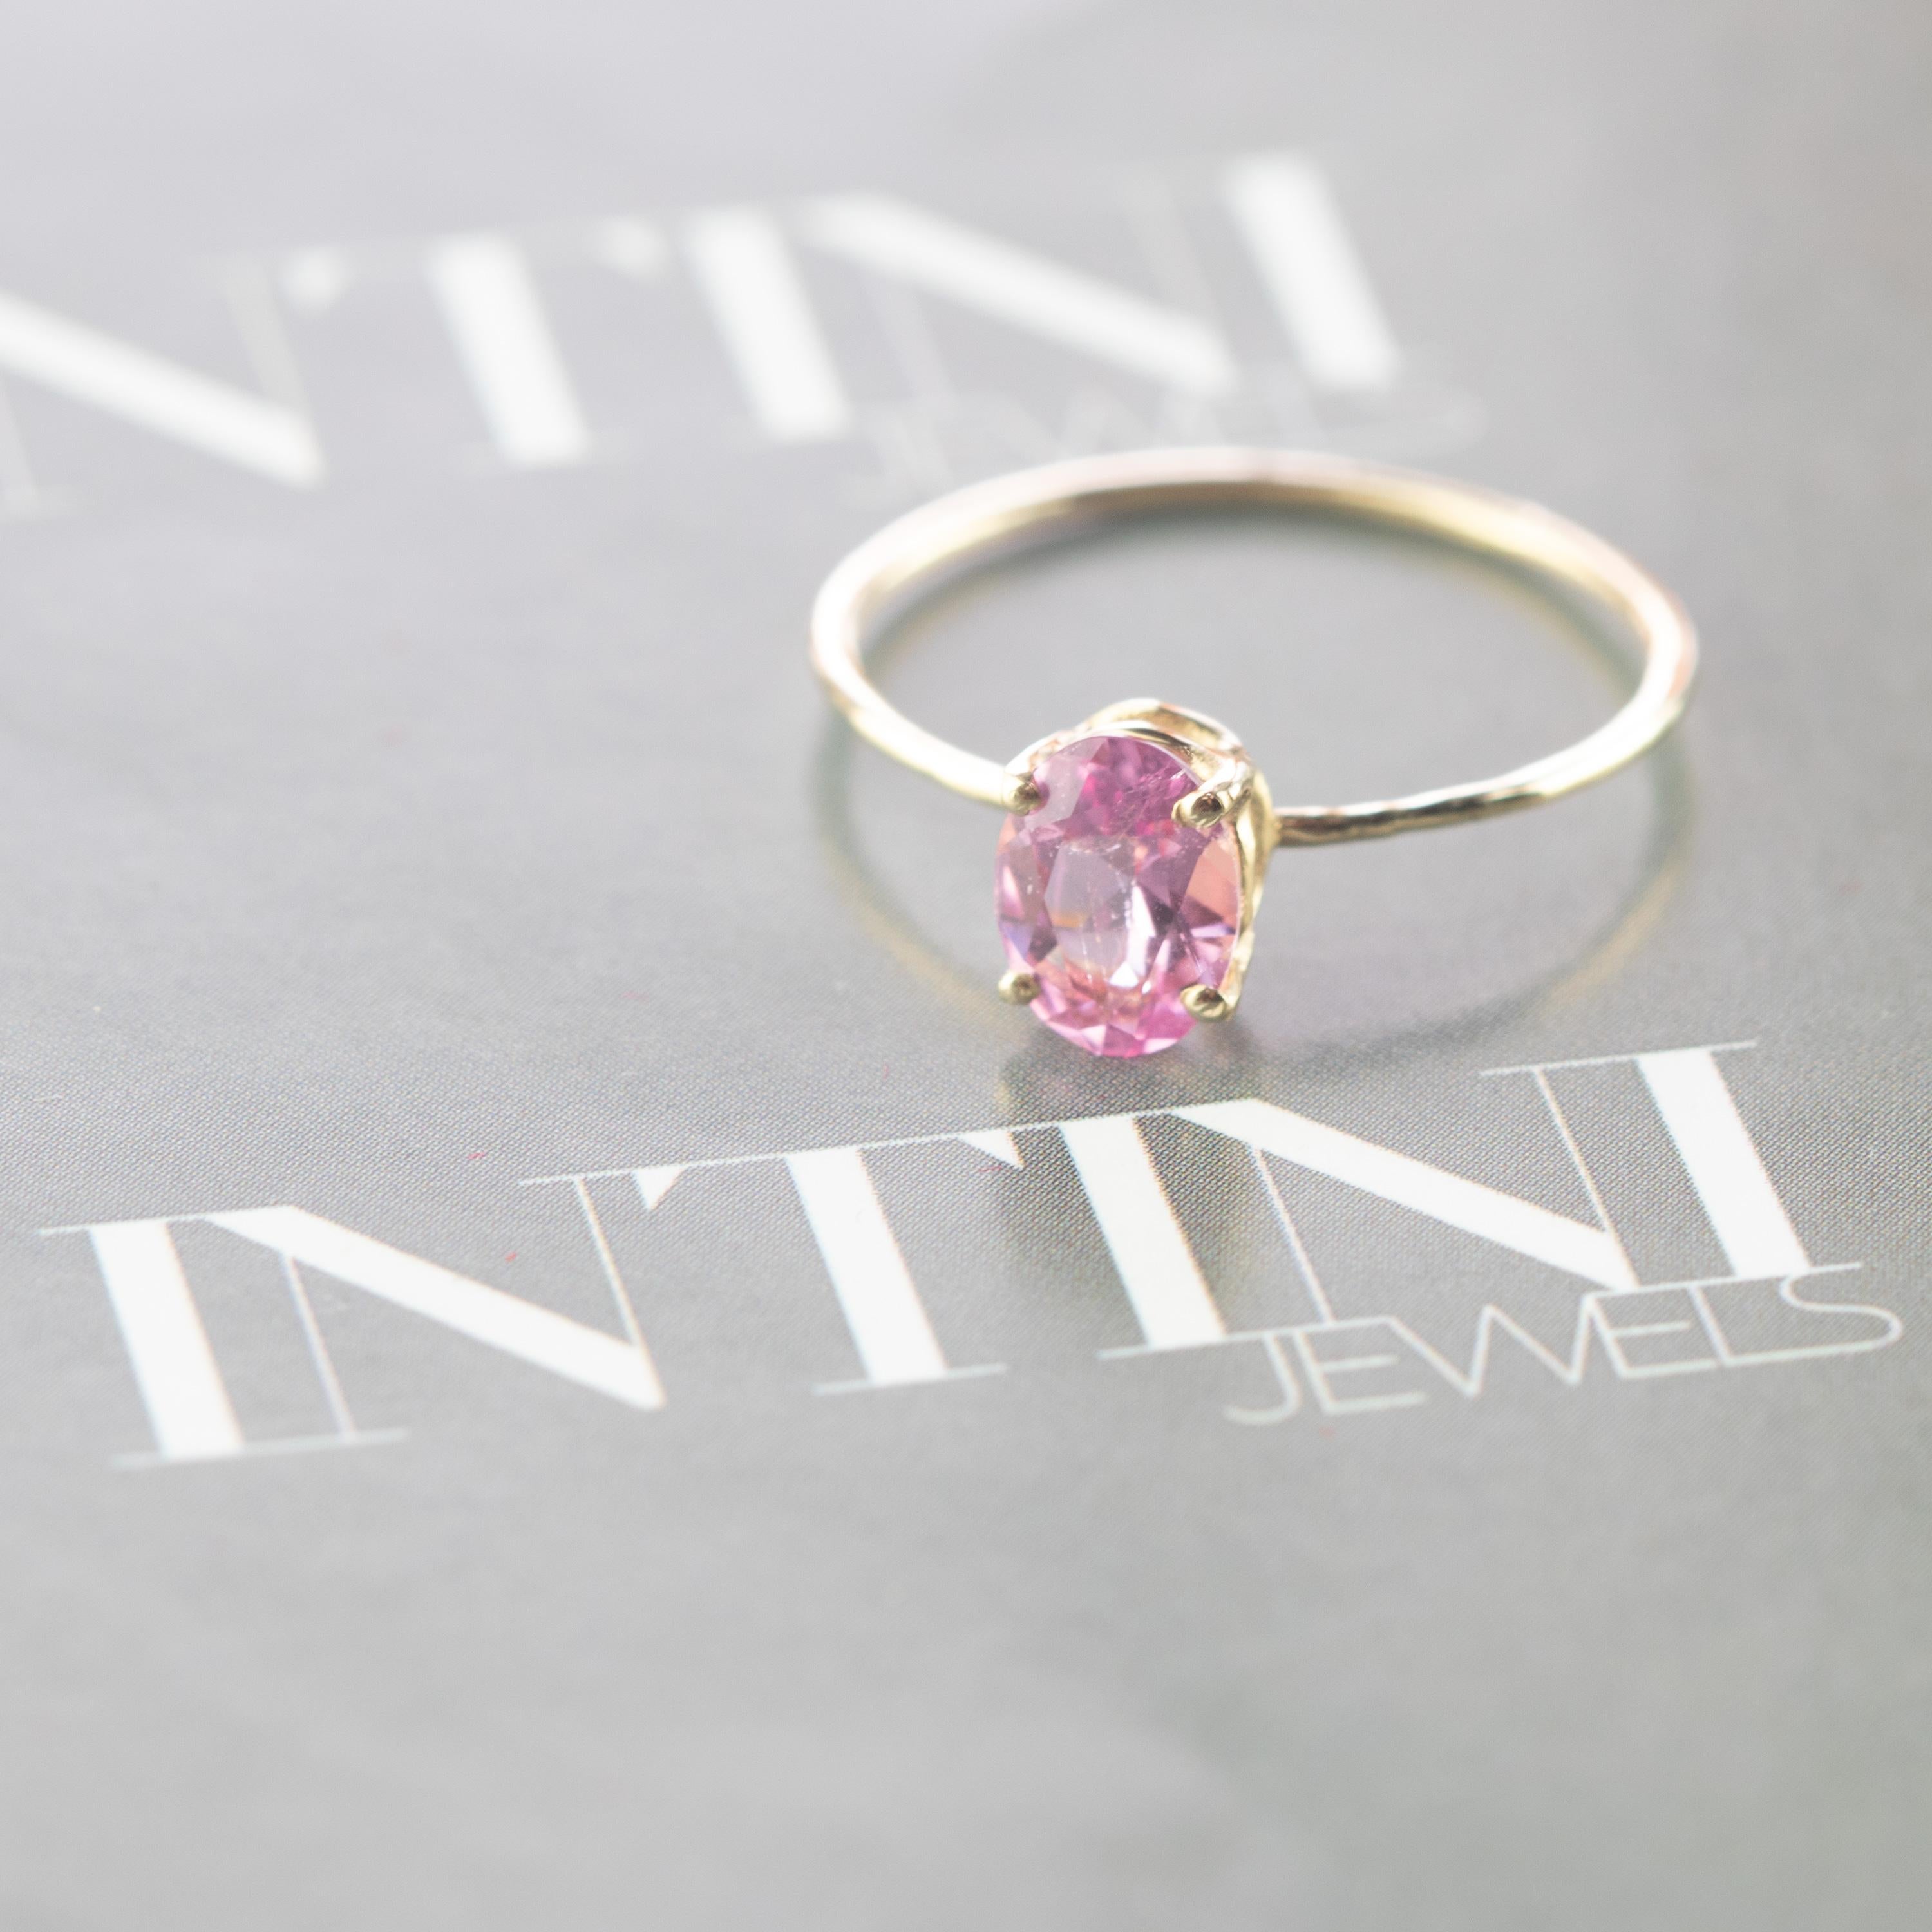 Signature INTINI Jewels Tourmaline jewellery. Modern and elegant midi ring design in 18k yellow gold with an oval cut with tiny griffes sormounting the ring. Oval, cocktail and handmade ring.

Pink Tourmaline graces the month of October with its